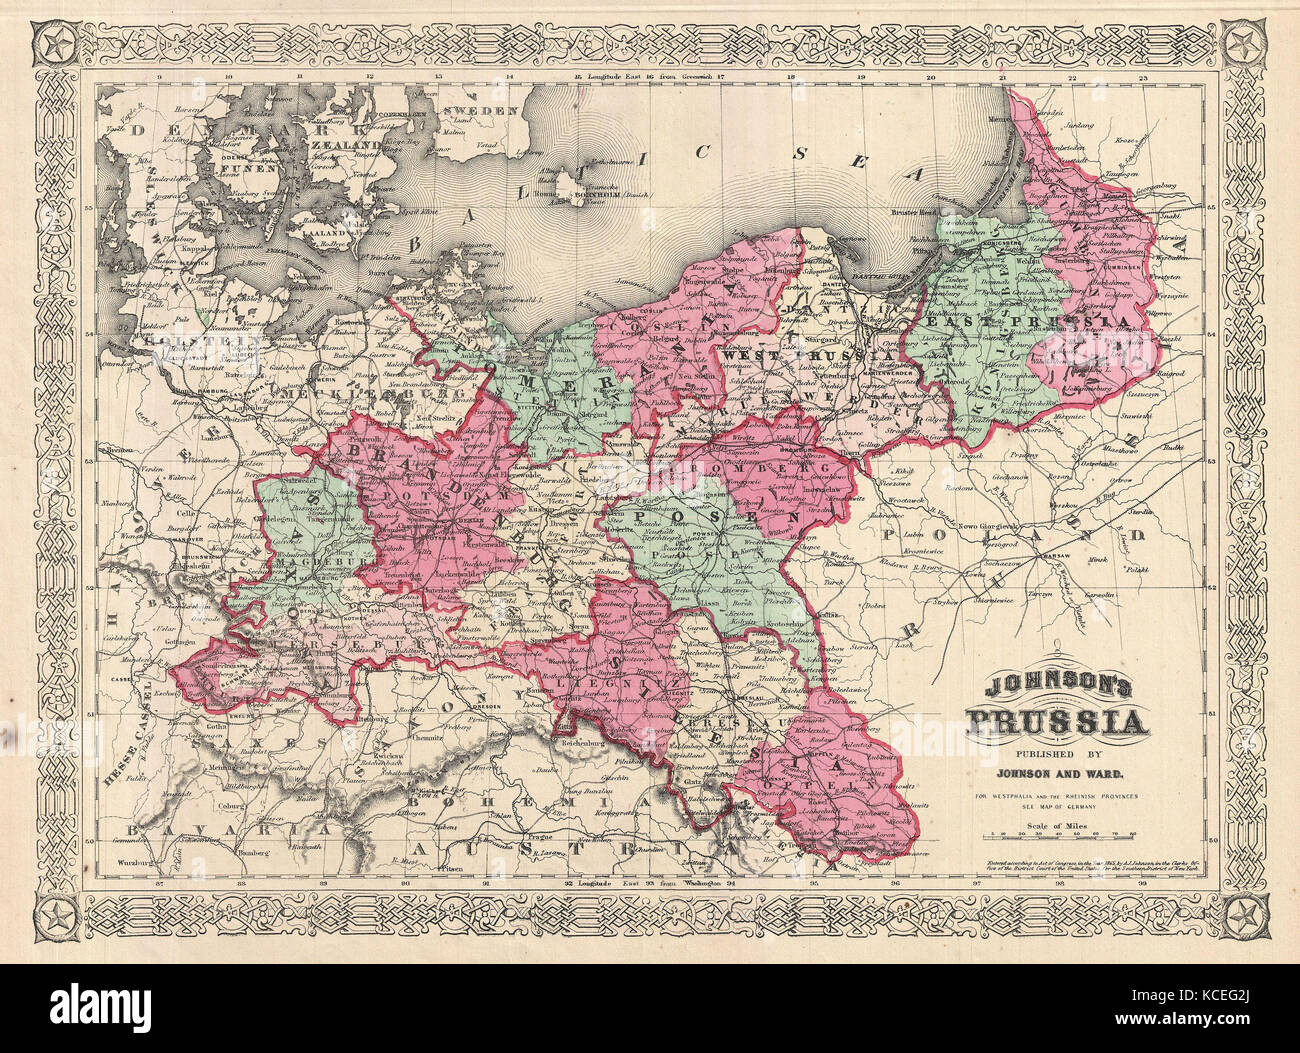 1866, Johnson Map of Prussia, Germany Stock Photo